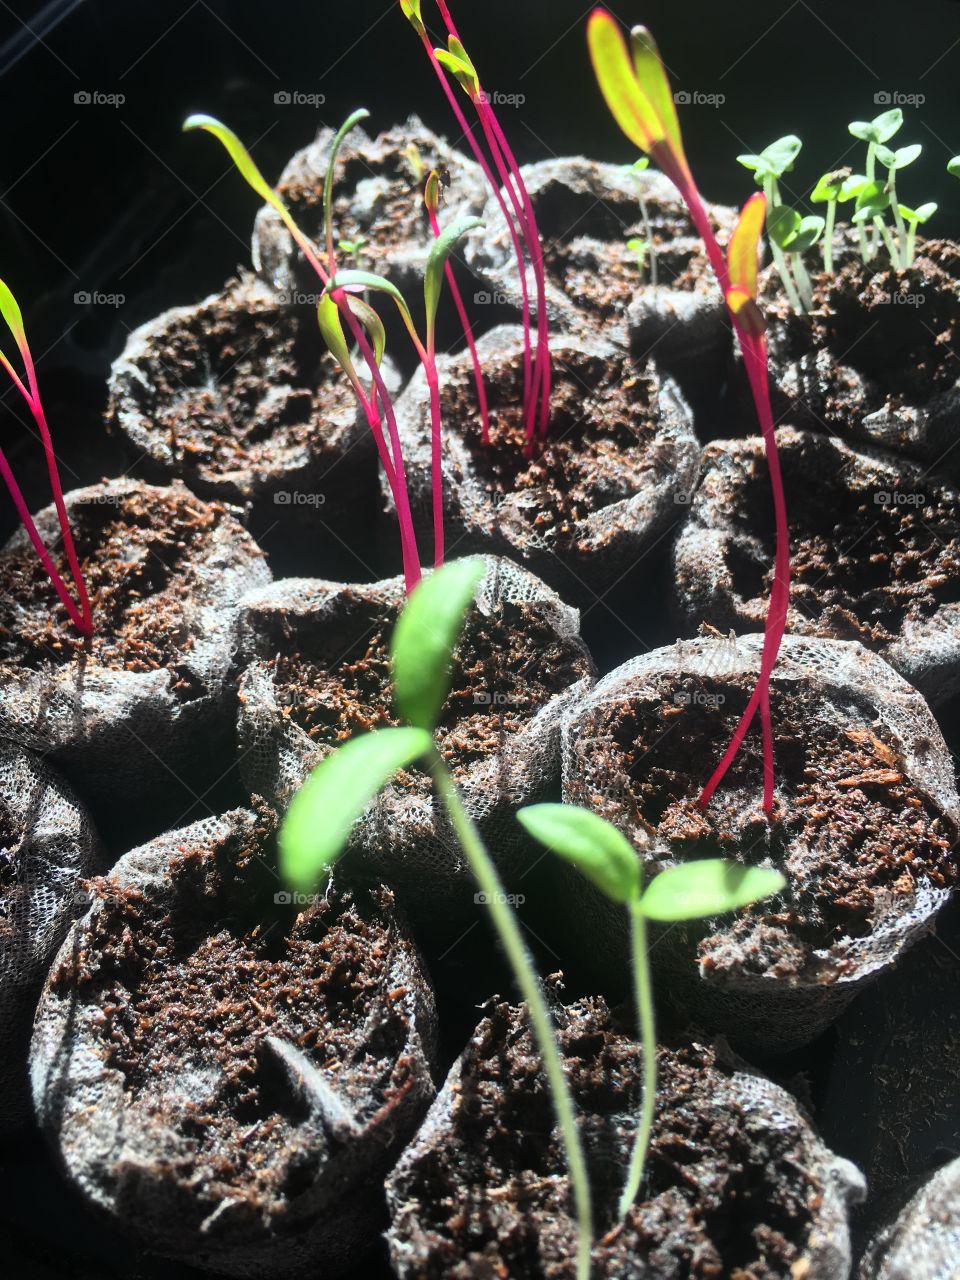 Seedlings/sprouts 